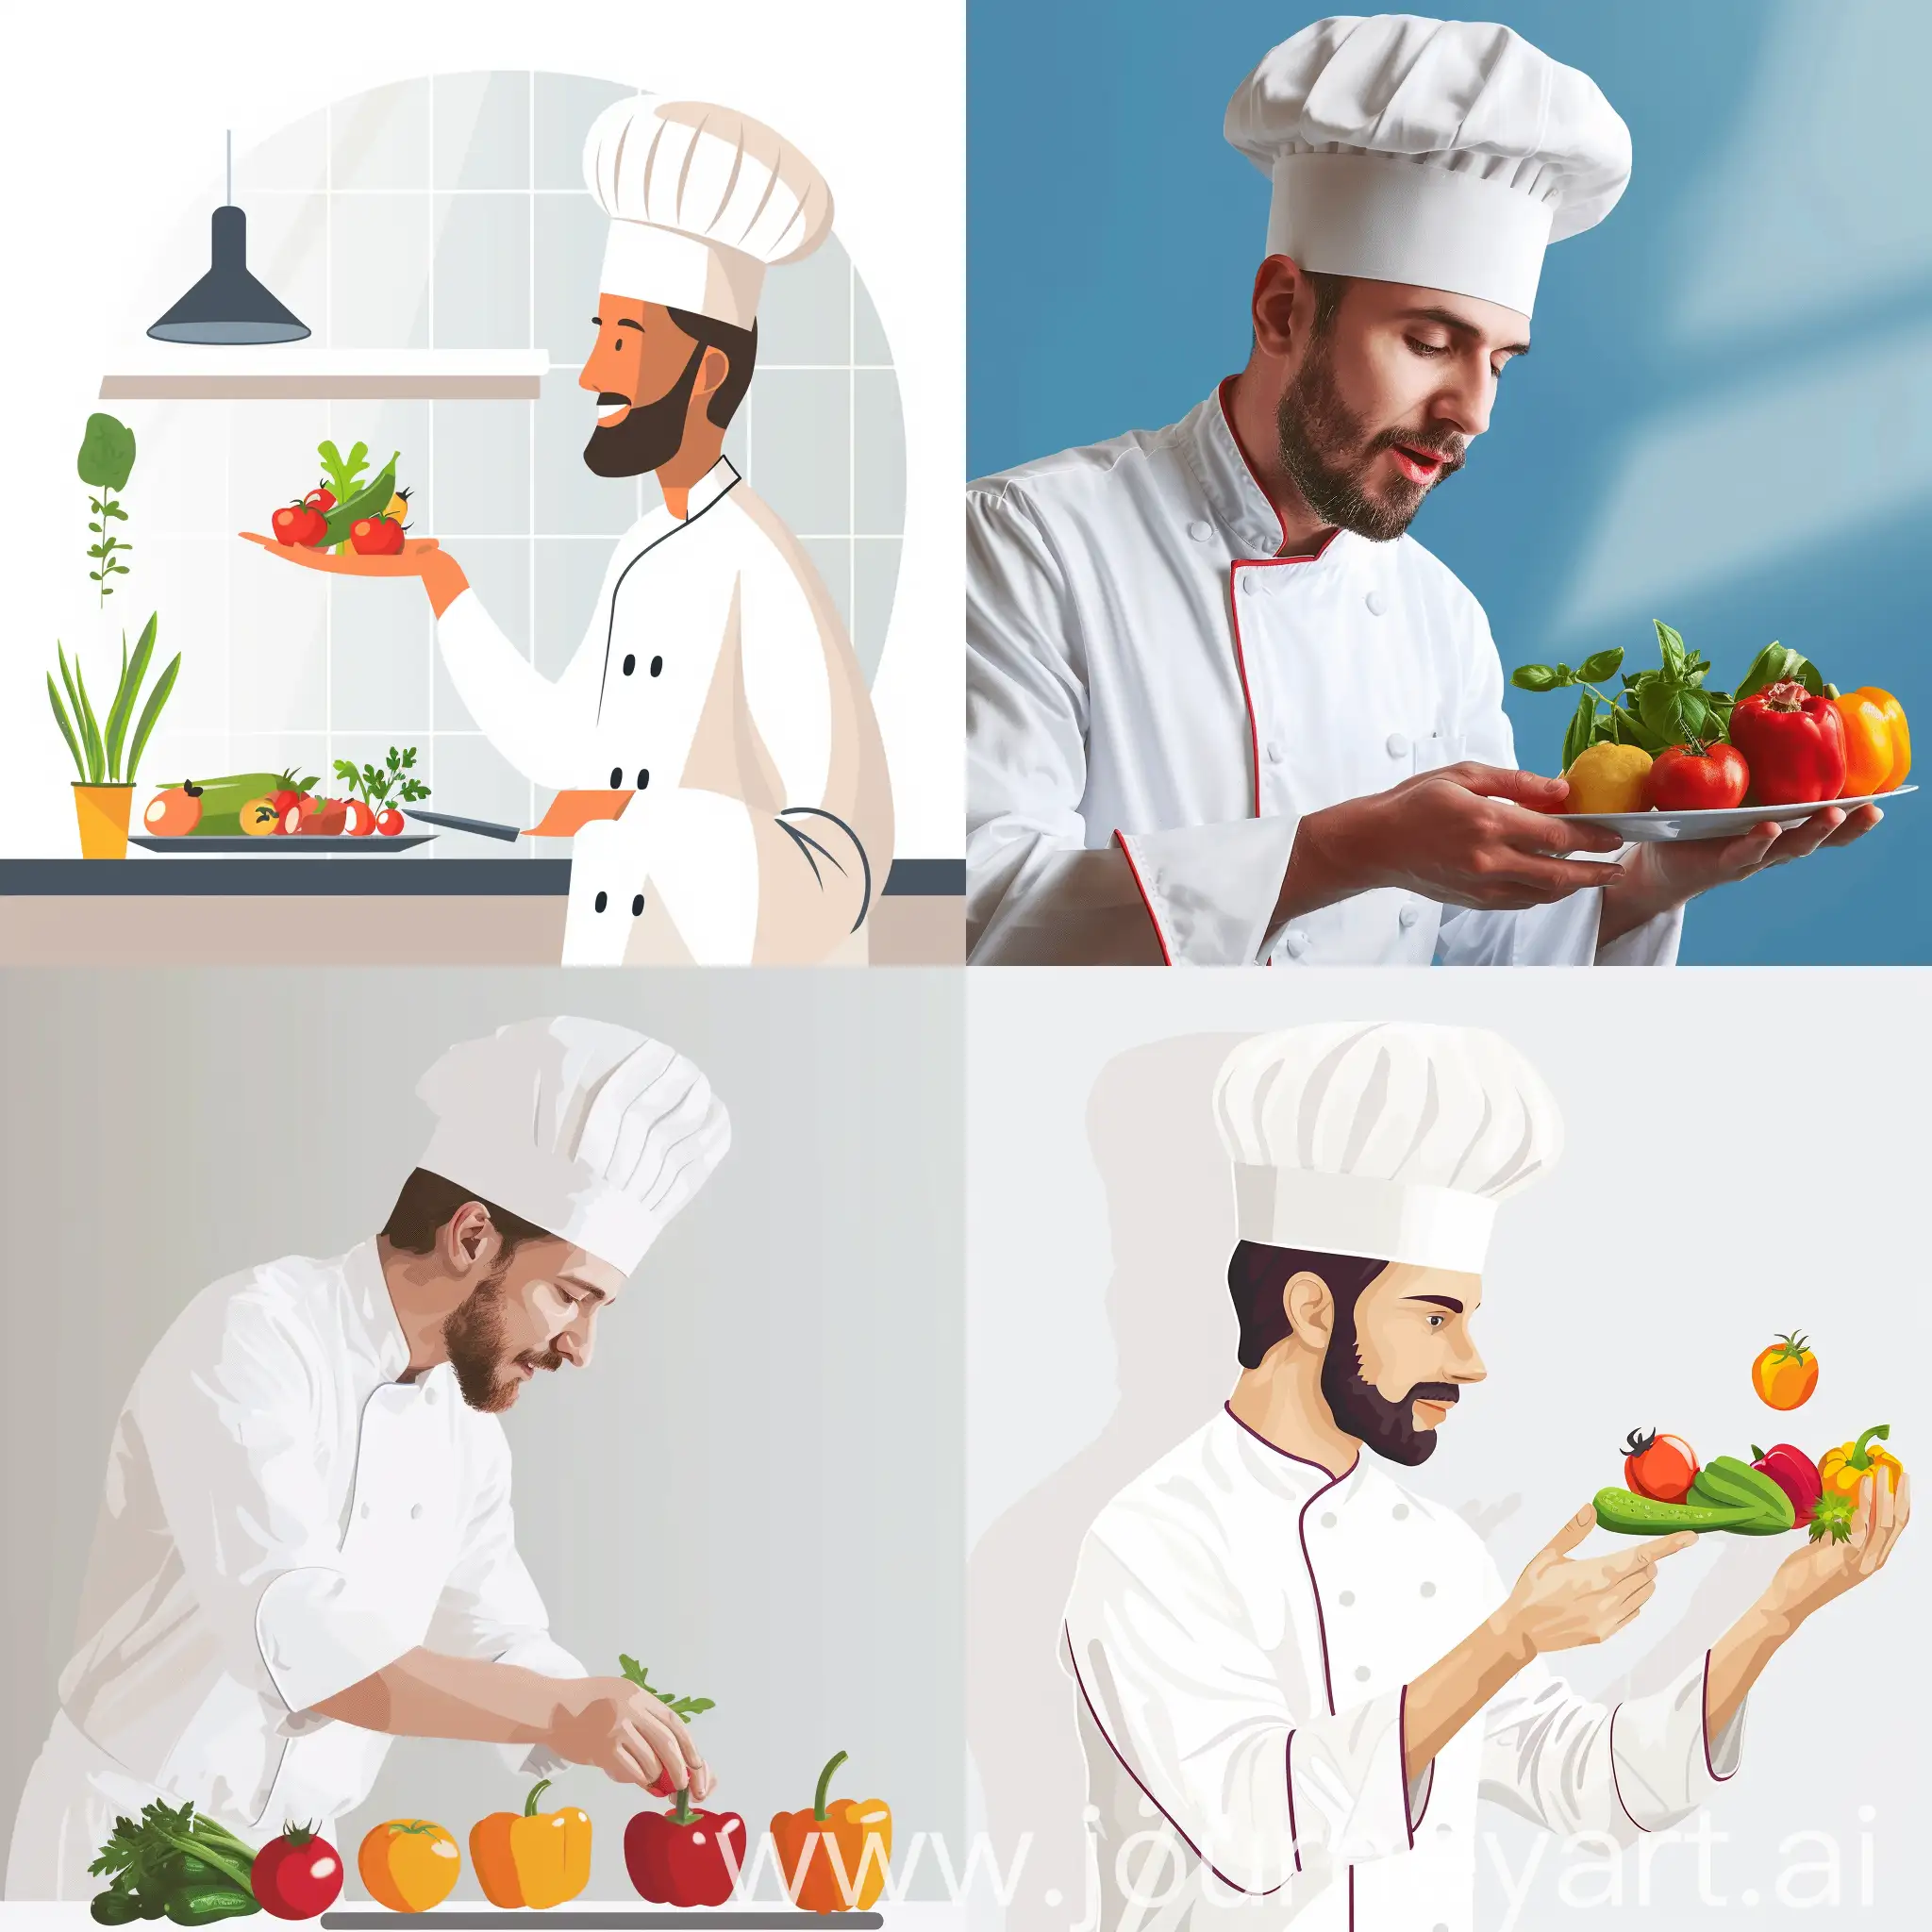 Chef-Inspecting-Fresh-Produce-Quality-in-Flat-Style-Under-Bright-Light